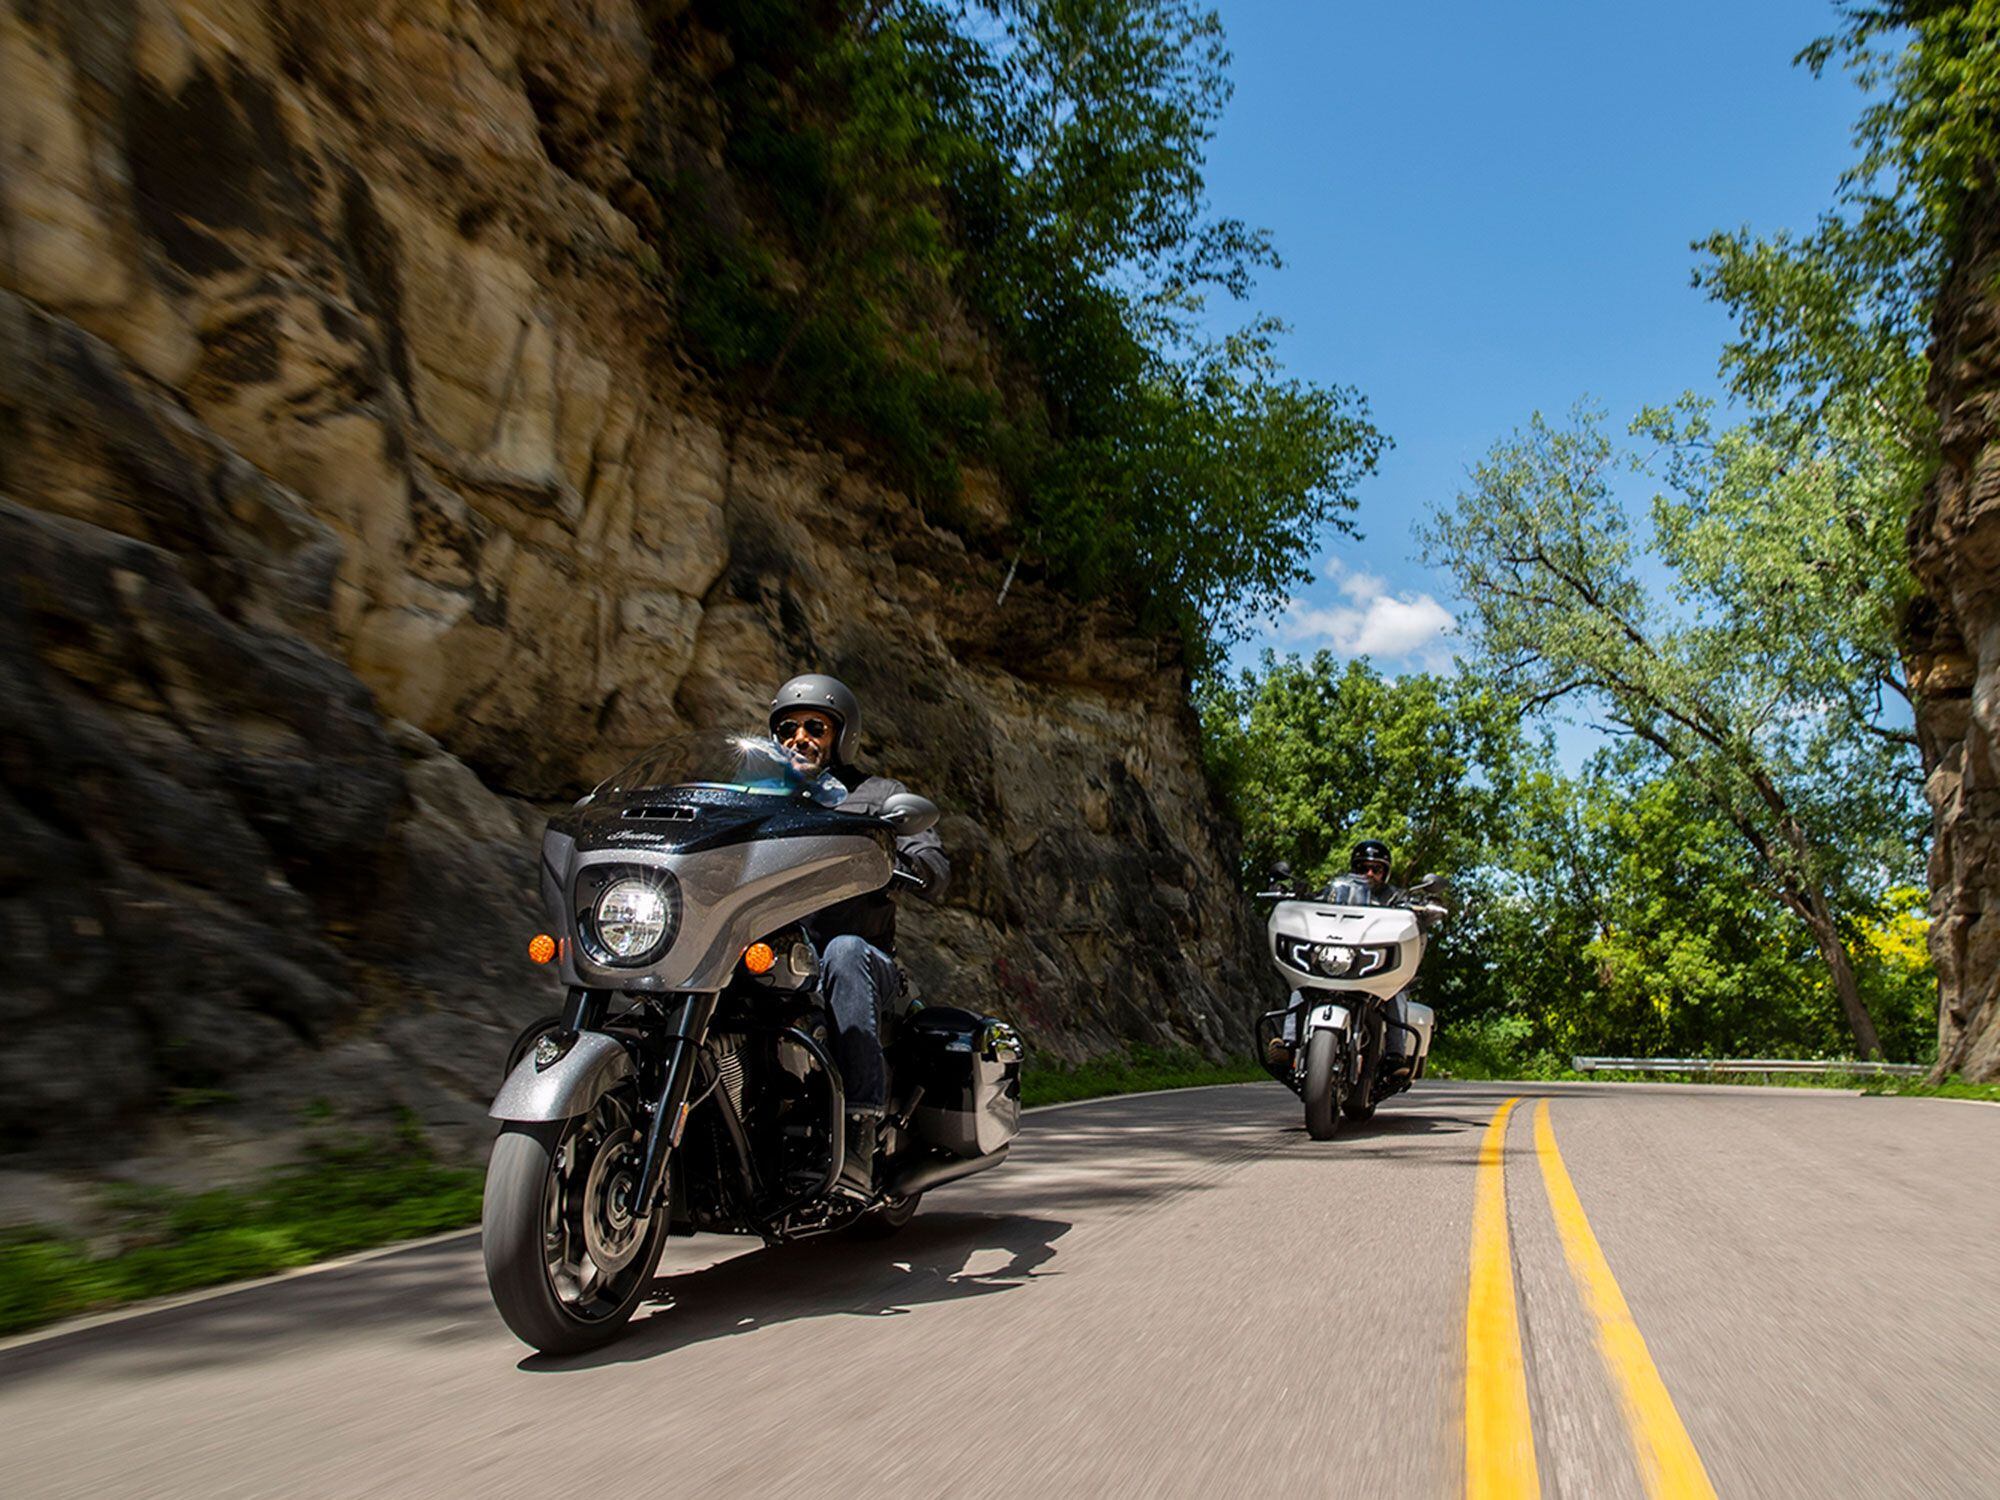  If you are lucky enough to grab a Chieftain Elite, there’s almost no chance you’ll pass another rider on one, no matter where you live.